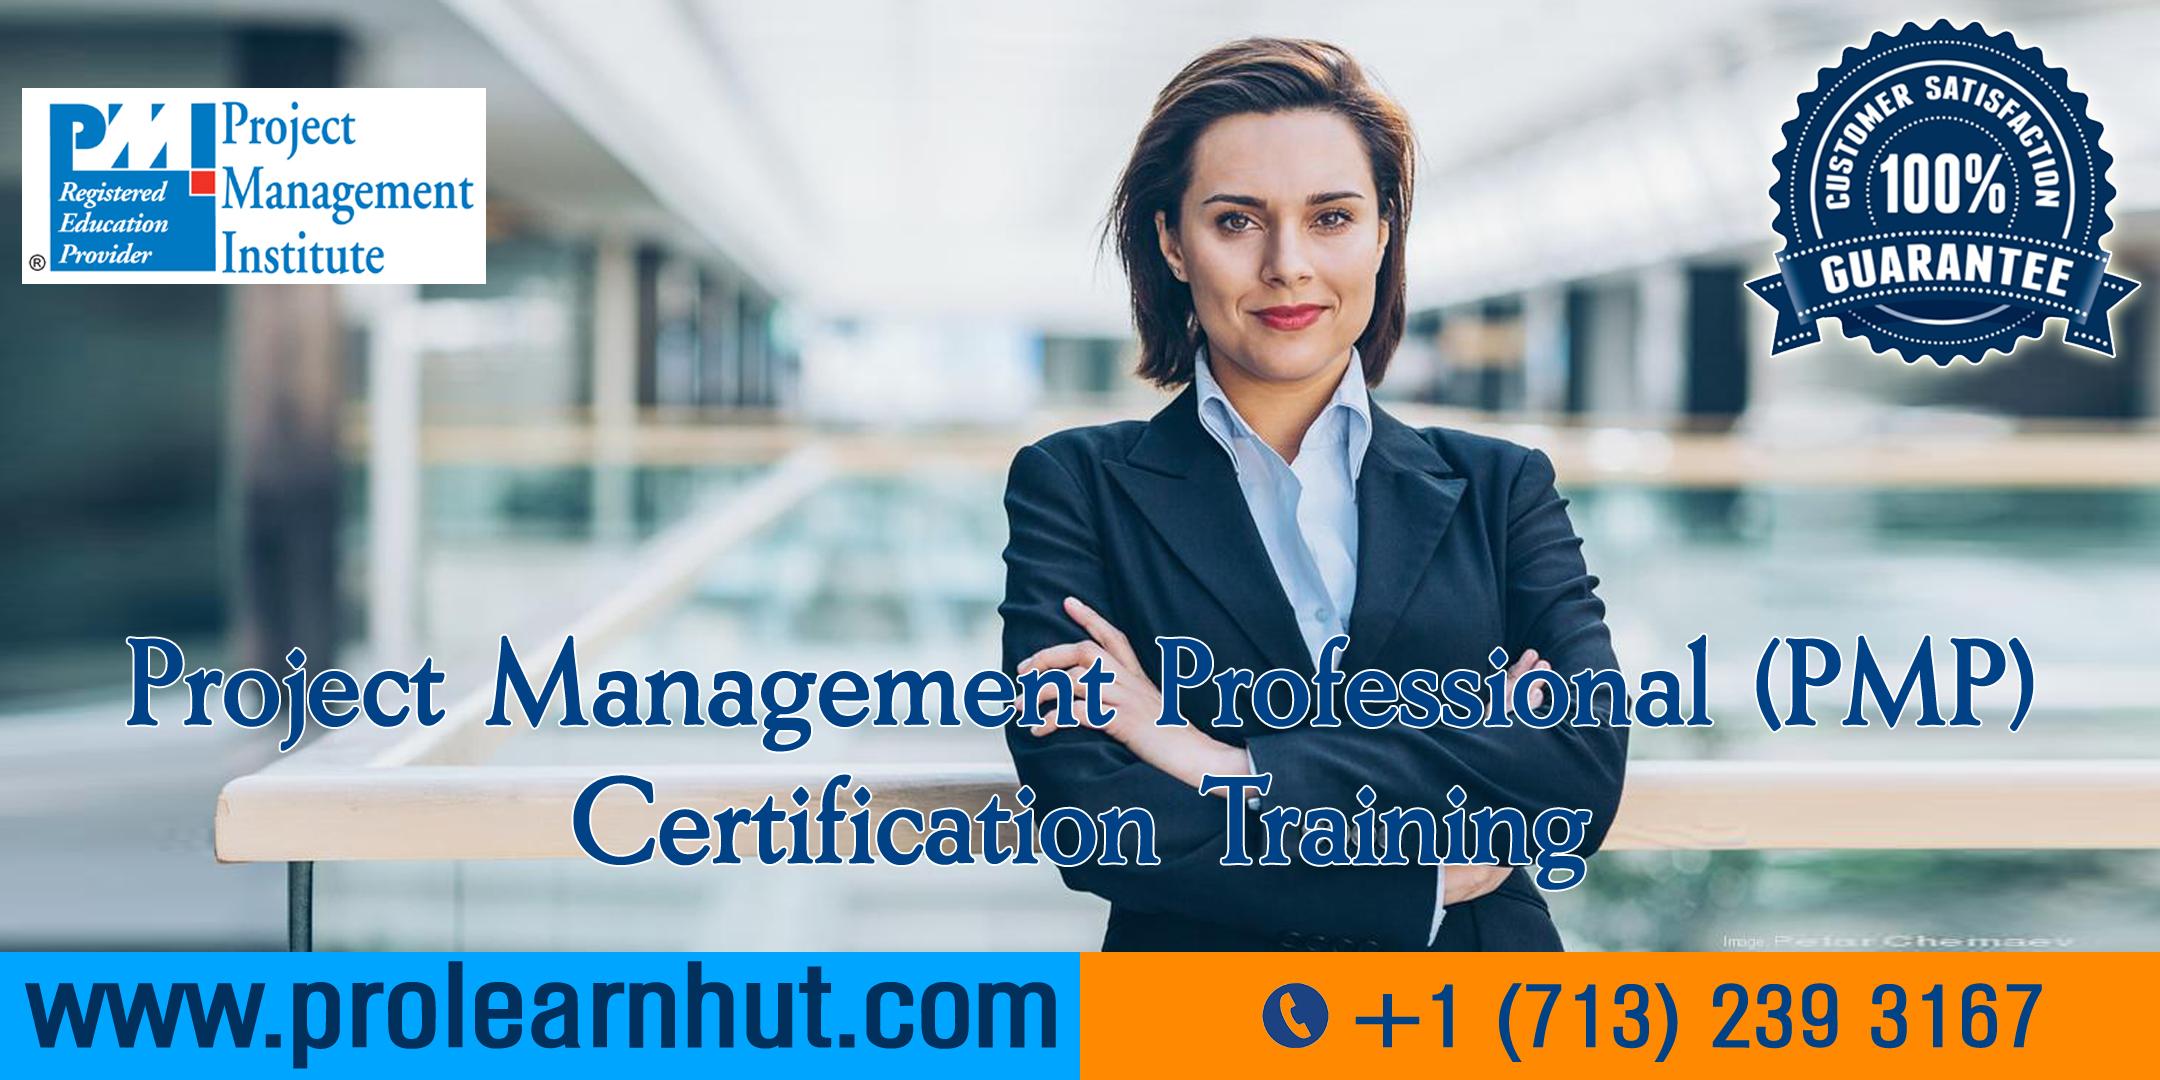 PMP Certification | Project Management Certification| PMP Training in Oklahoma City, OK | ProLearnHut